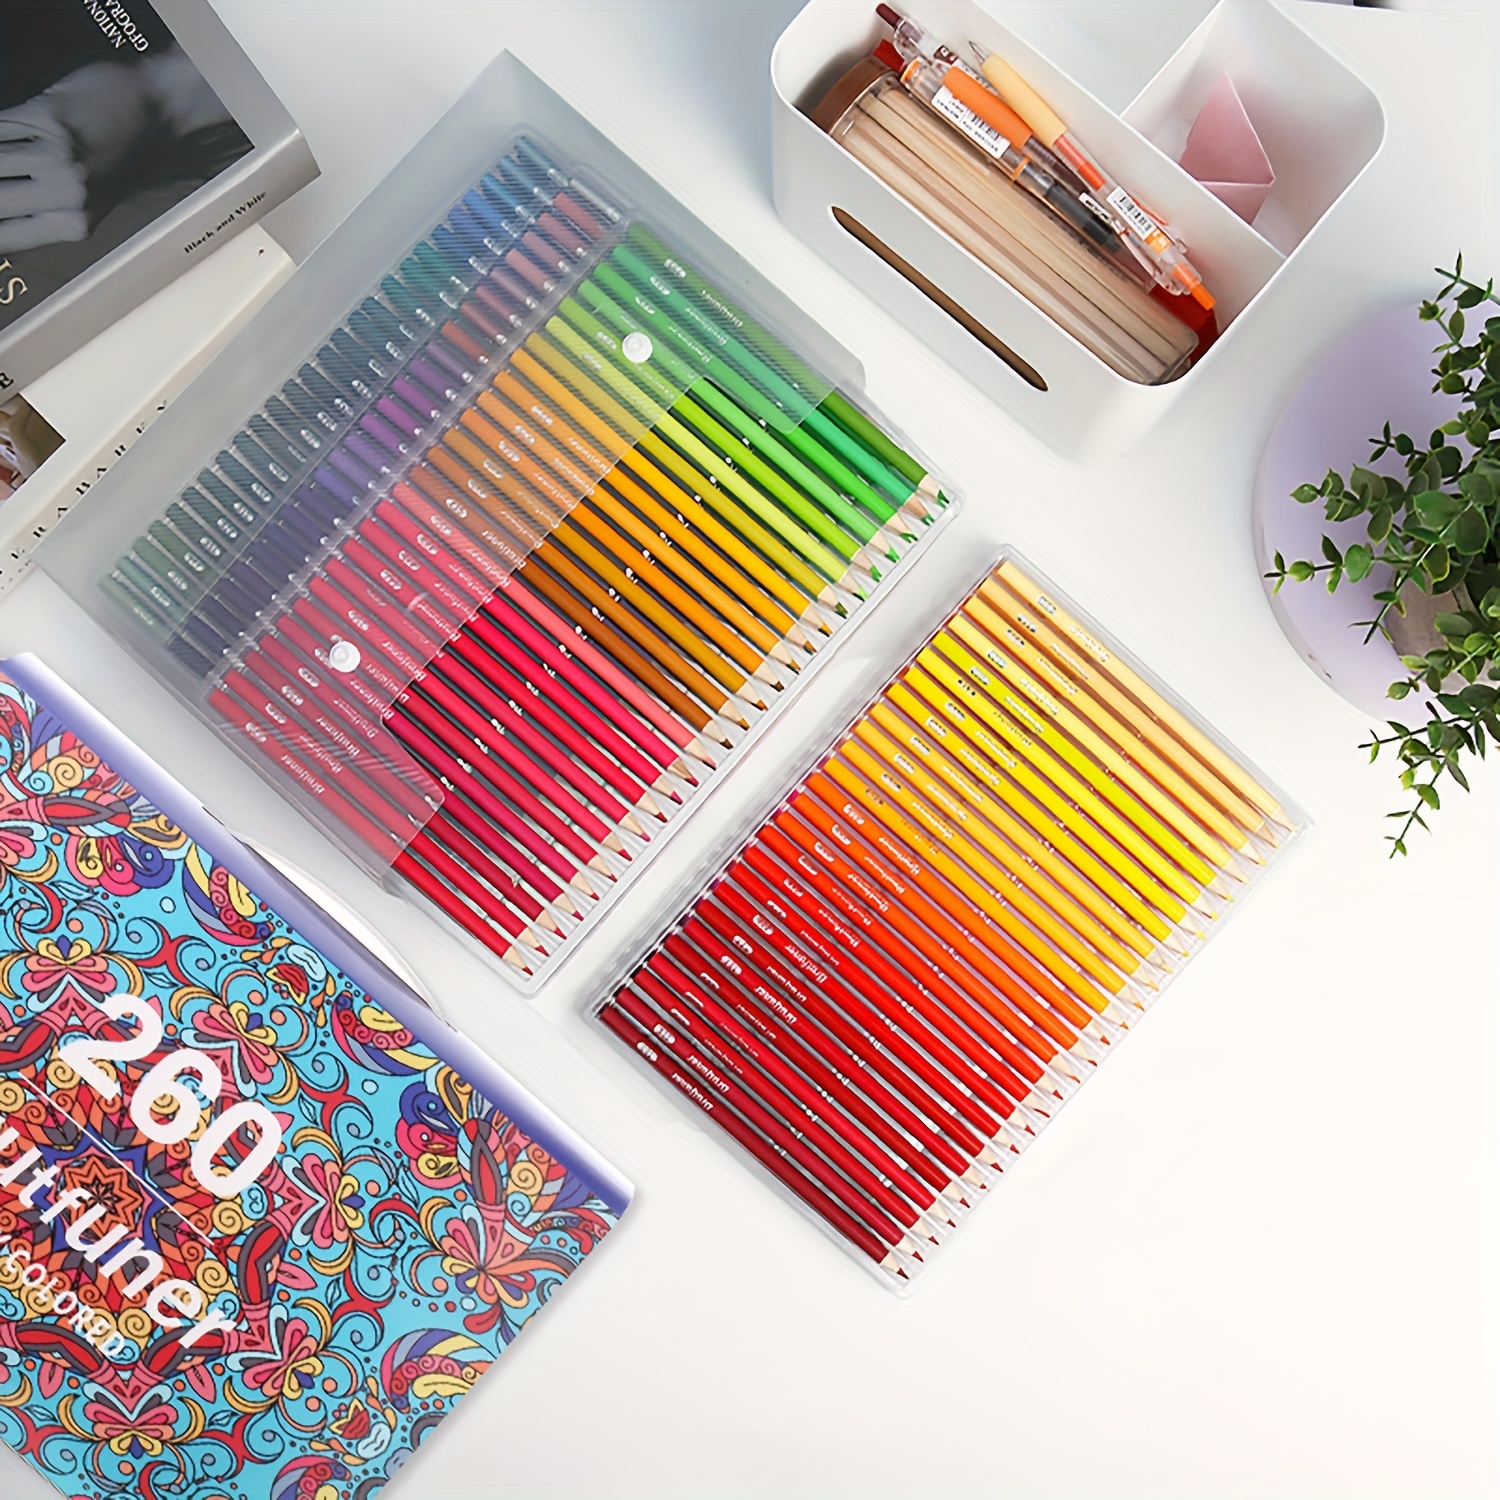  DAPNHA Colored Pencils Set, Unique Colors with No Duplicates  for Adult Coloring Books, Drawing, Sketching, Crafting and Artists (Water  soluble, 48 color) : Arts, Crafts & Sewing